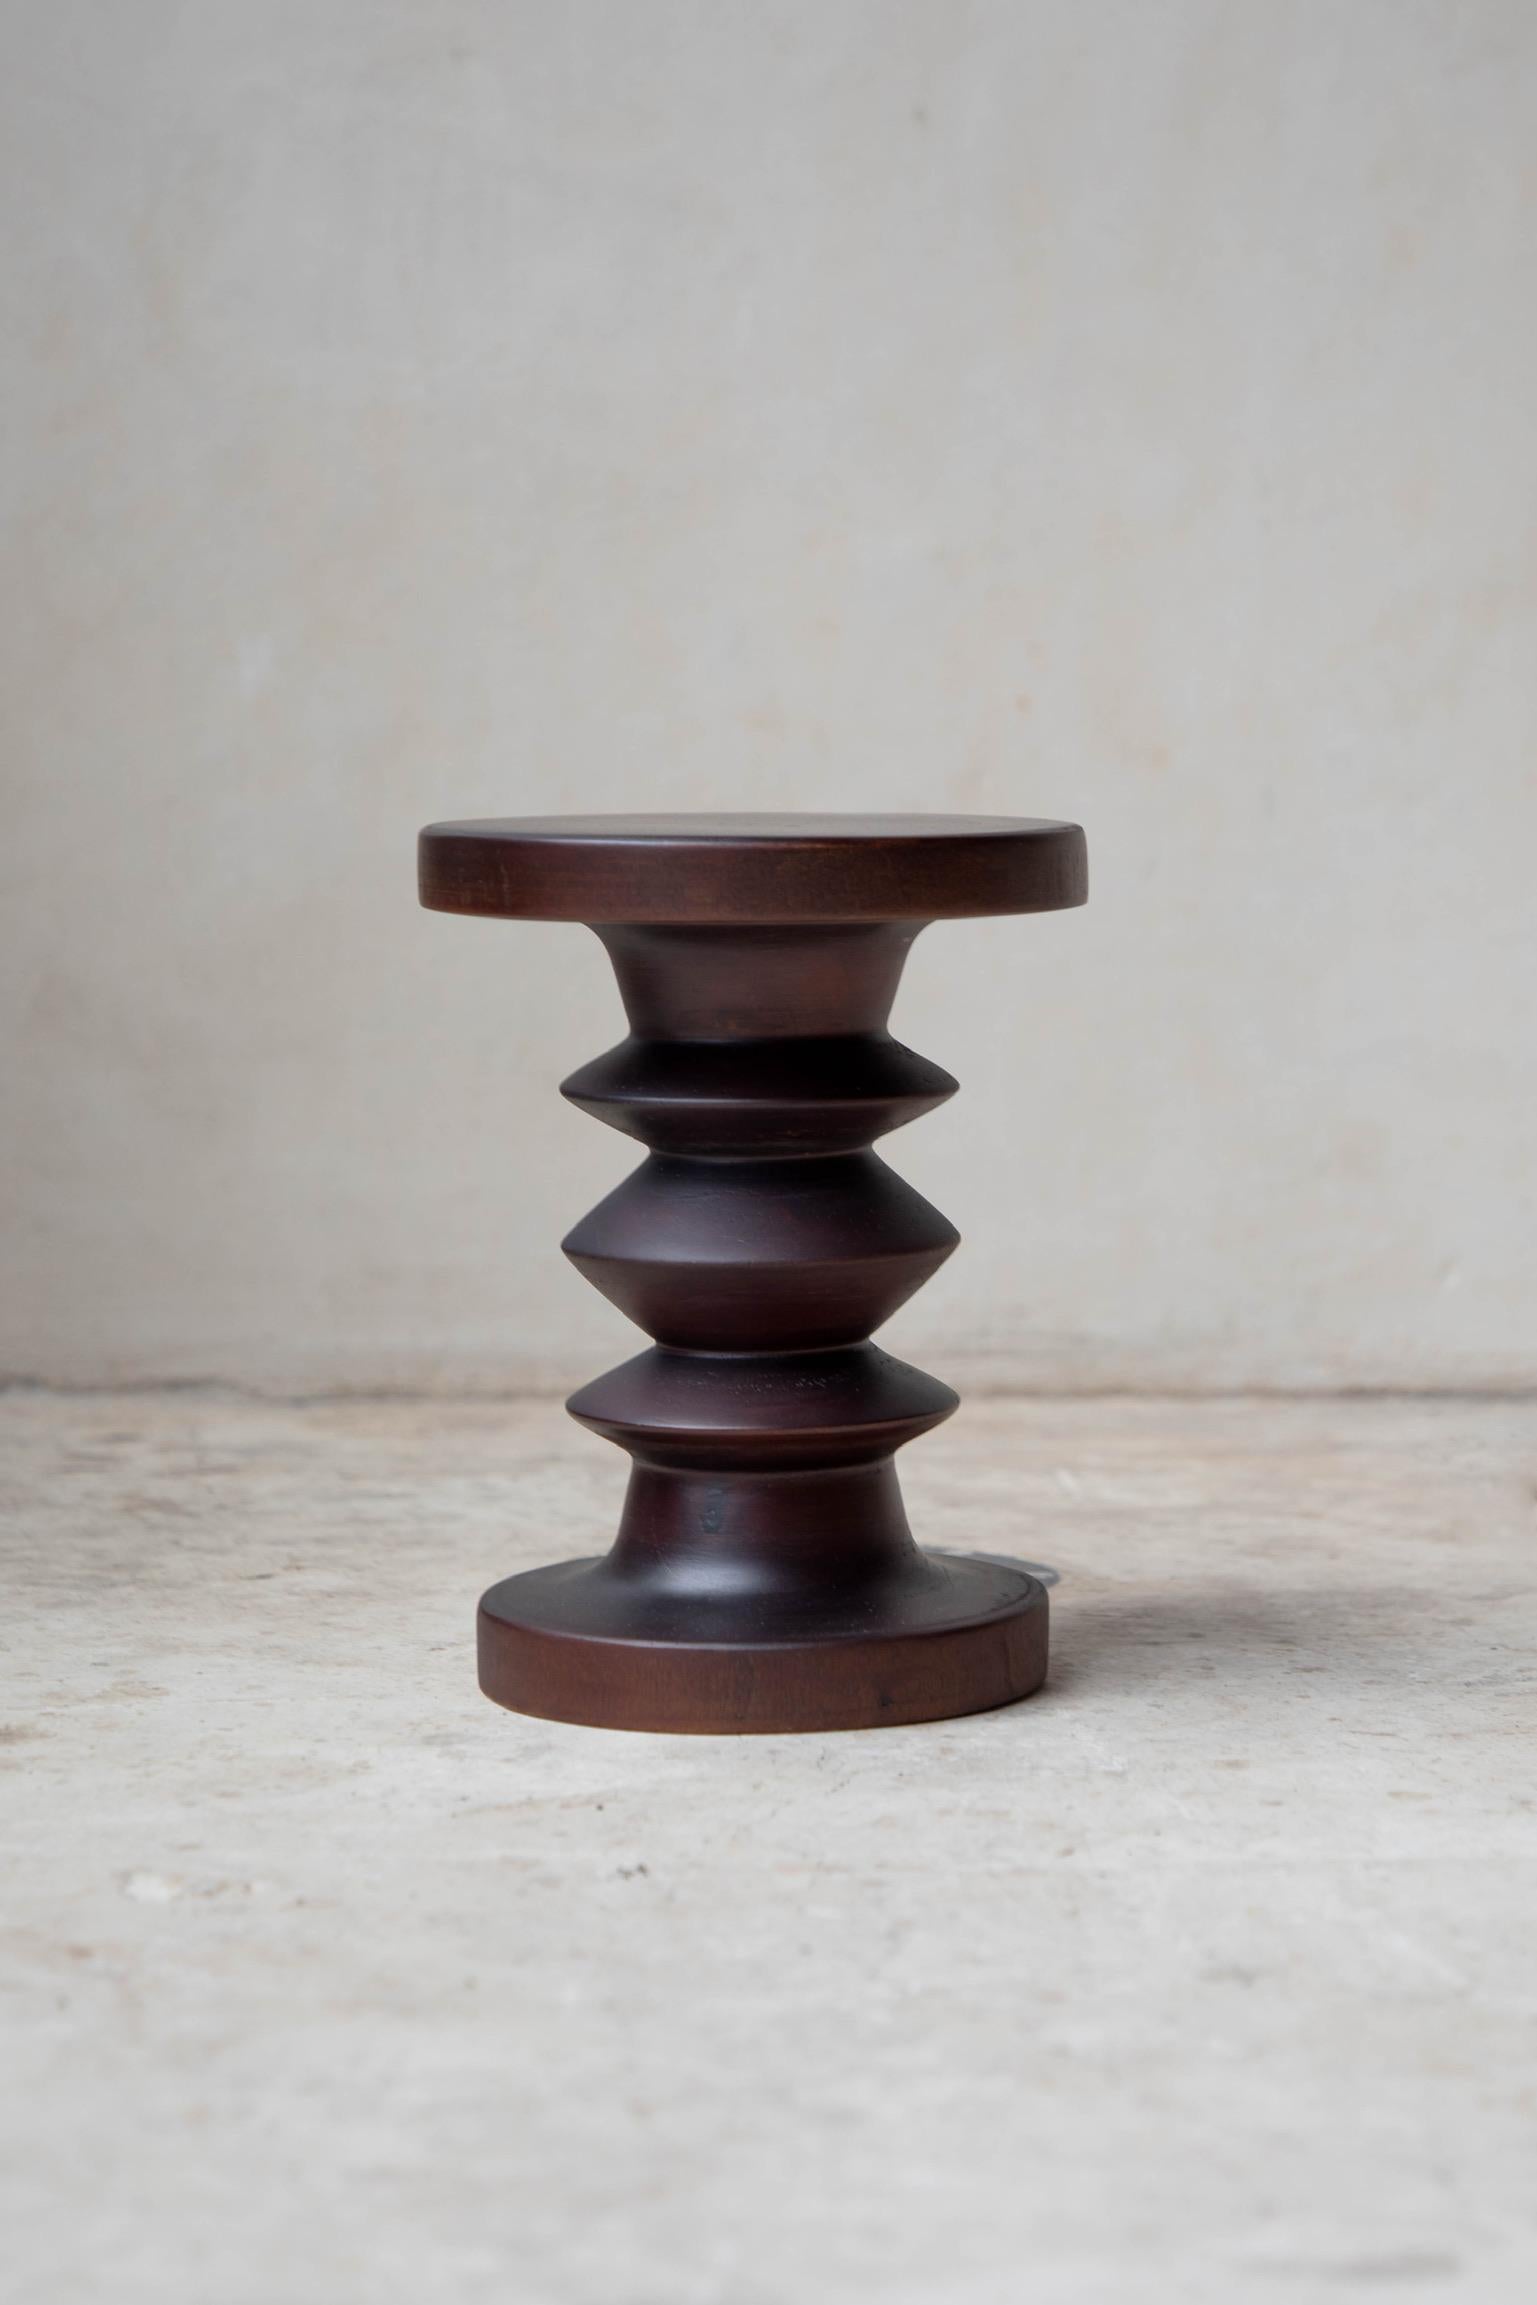 Raw sculpted jabin totem by Daniel Orozco
Material: Jabin wood.
Dimensions: D 35 x H 45 cm

Rounded jabin wood Totem, raw finish. Handmade by Mexican artisans.

Daniel Orozco Estudio
We are an inclusive interior design estudio, who love to